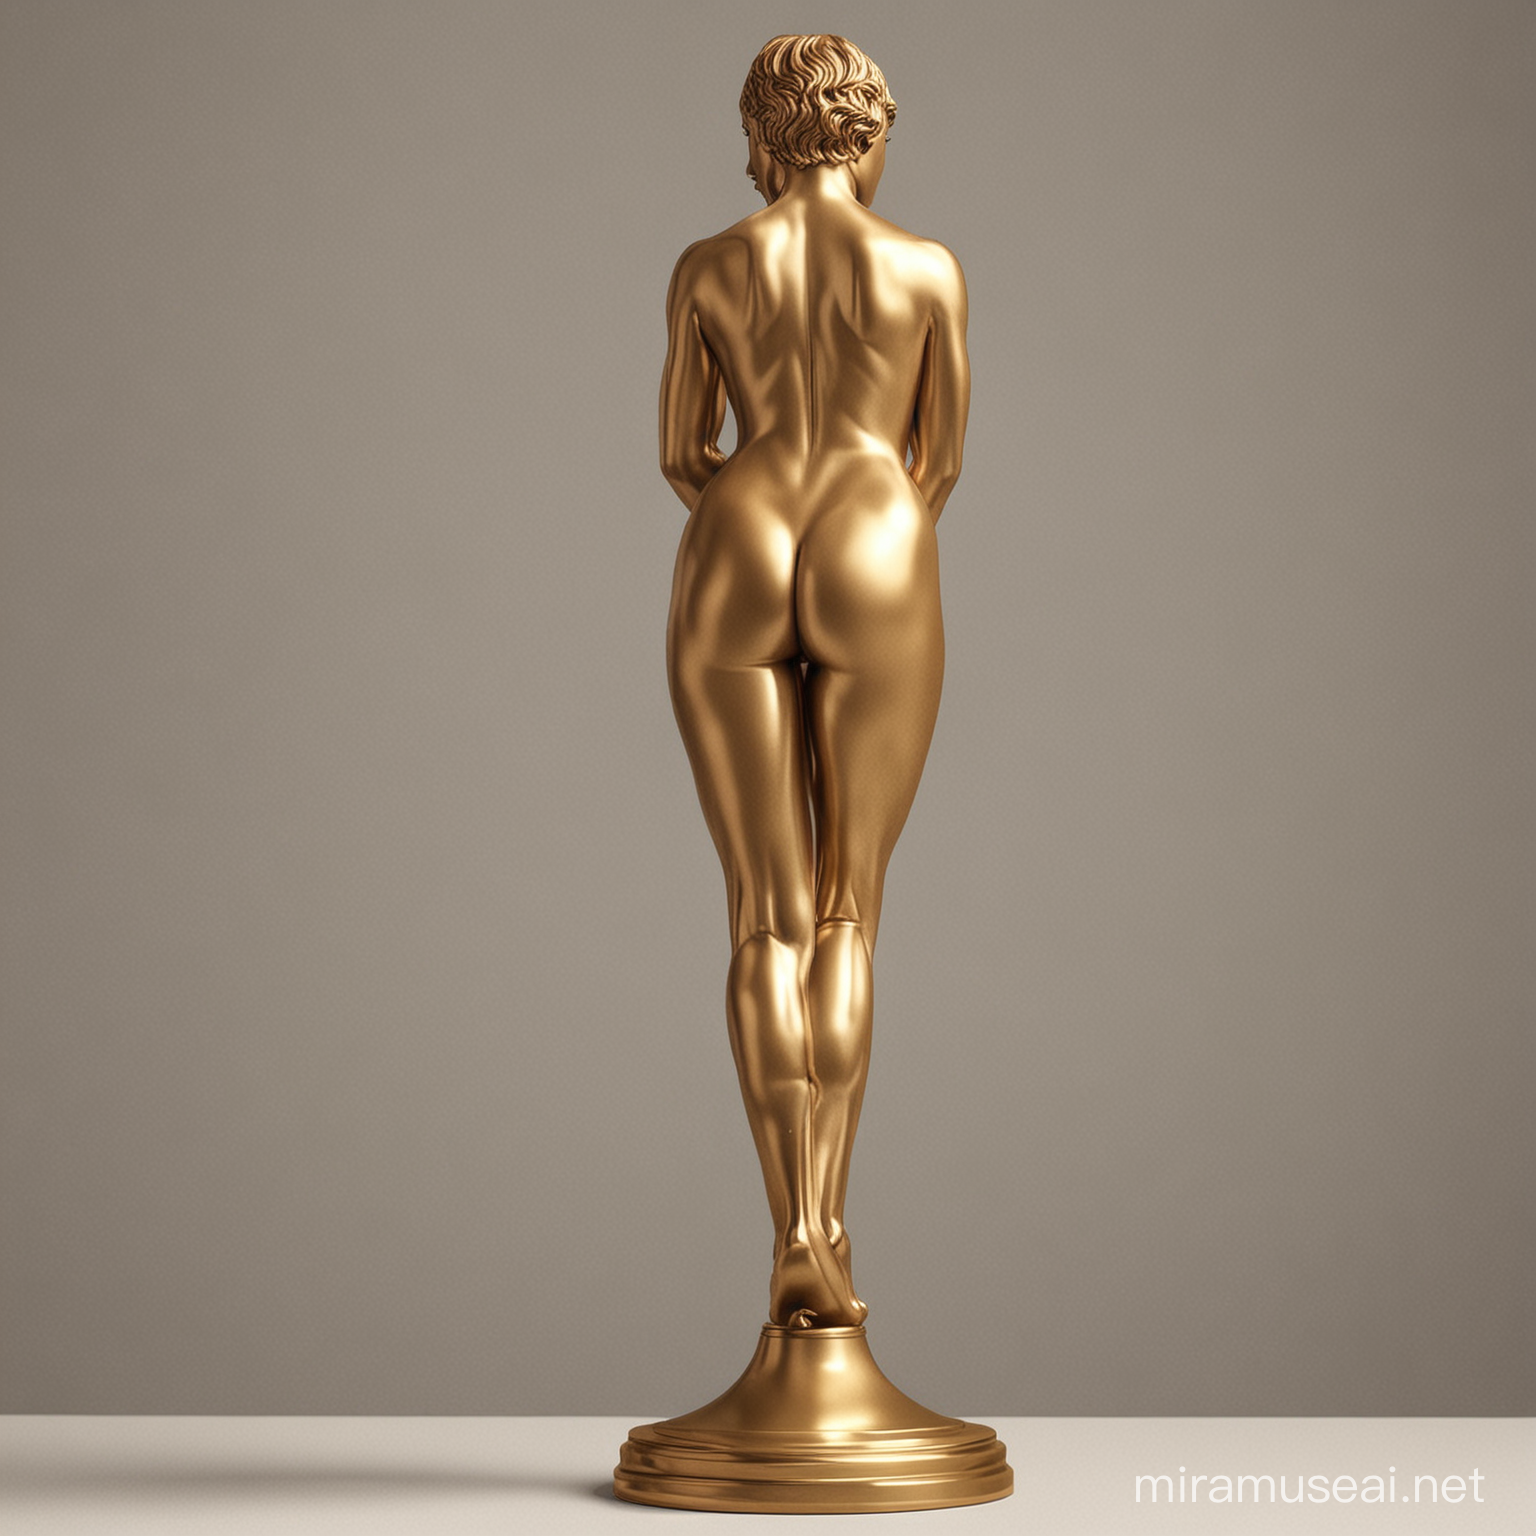 Sculpture of Nude Woman Elegant Award Trophy with Feminine Form